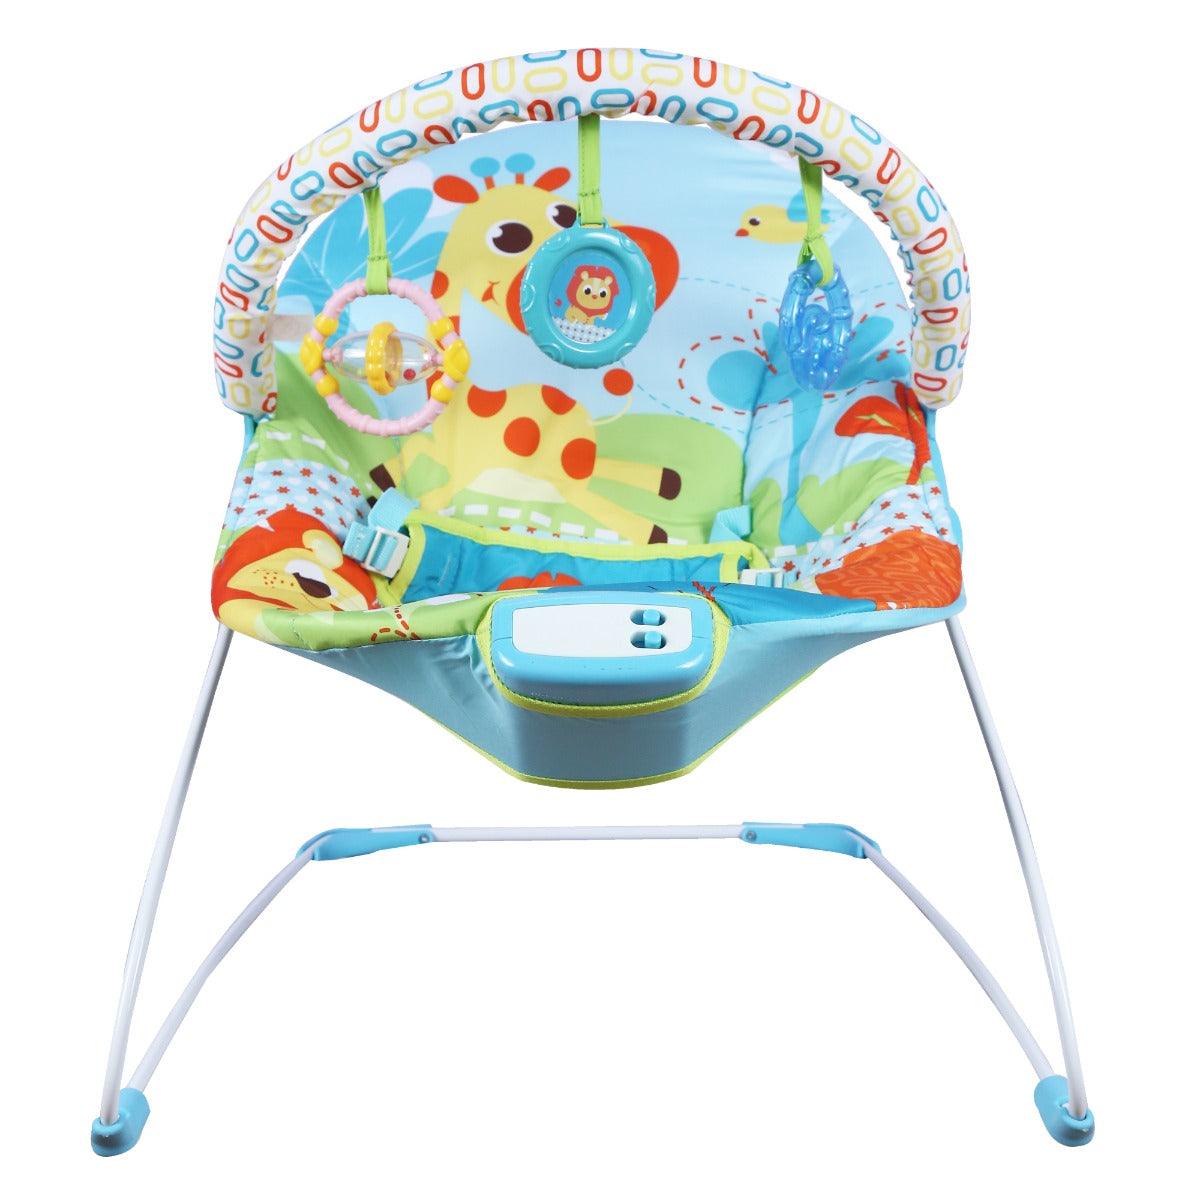 Mastela Music Vibrations Bouncer Jungle 1 - For Ages 0-1 Years